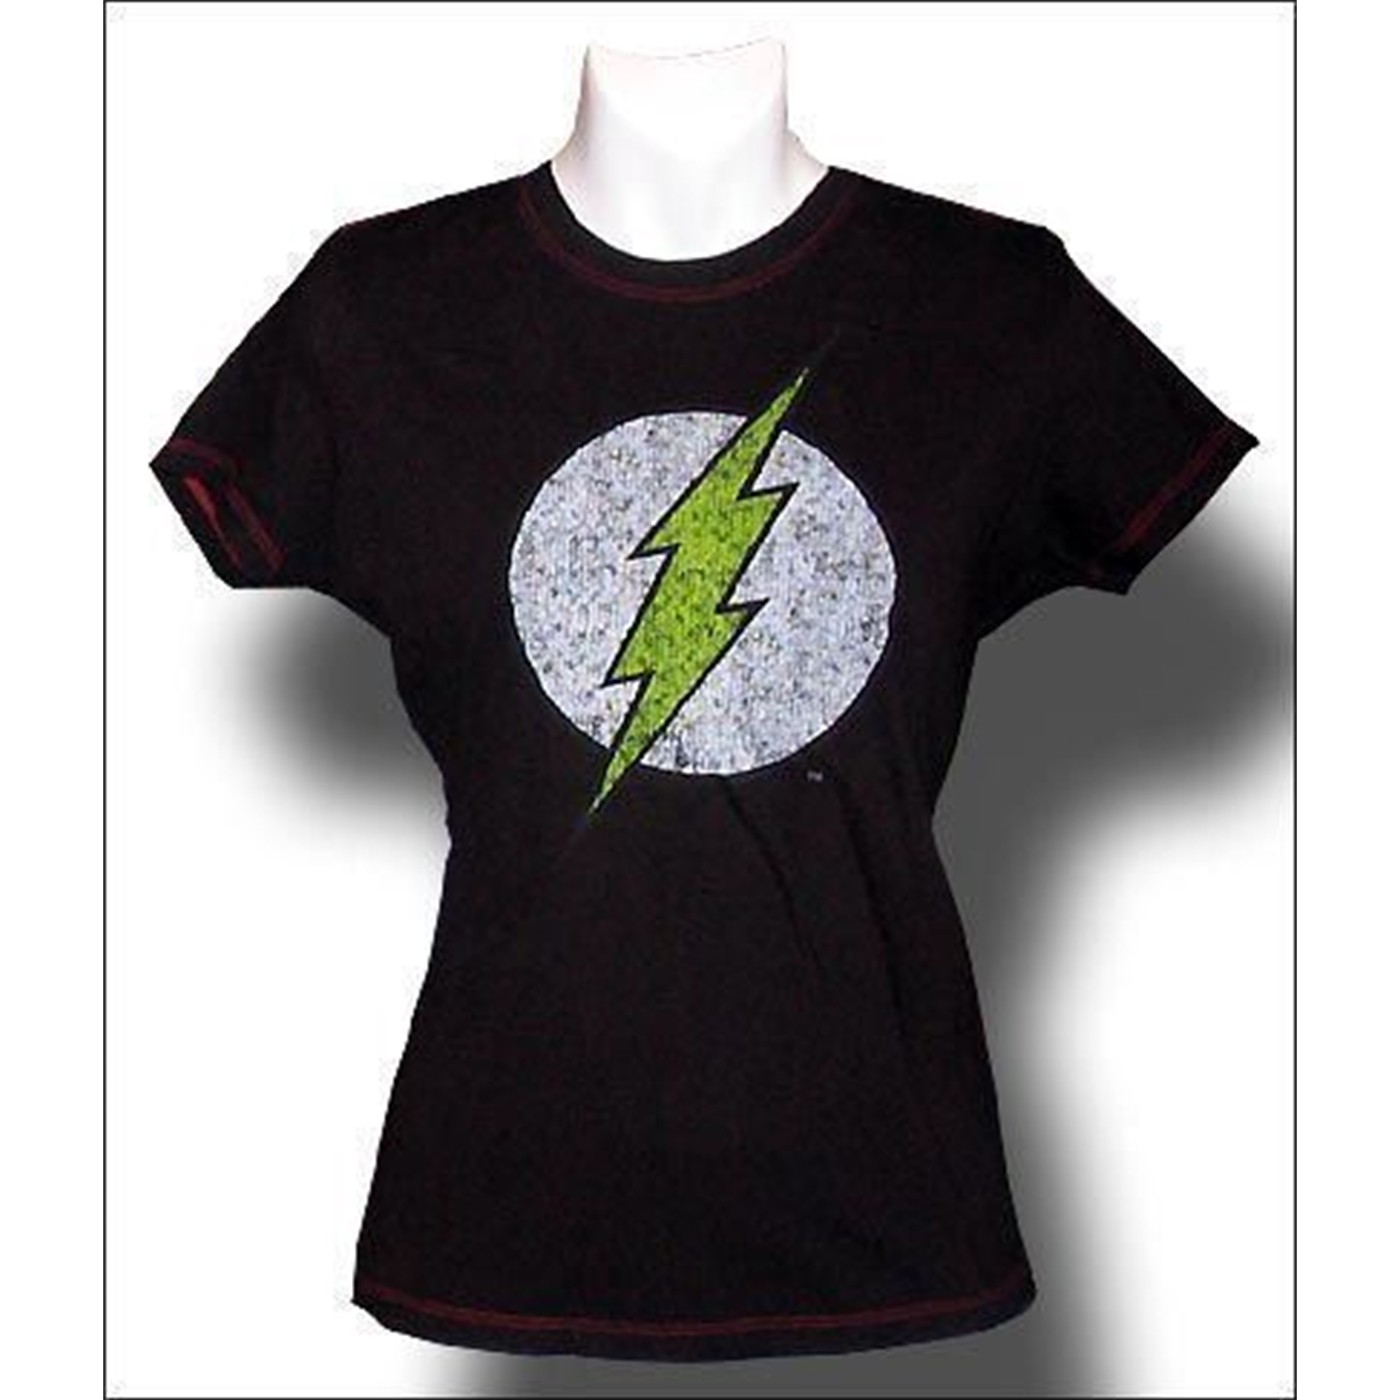 The Flash Women's Distressed Chocolate T-Shirt